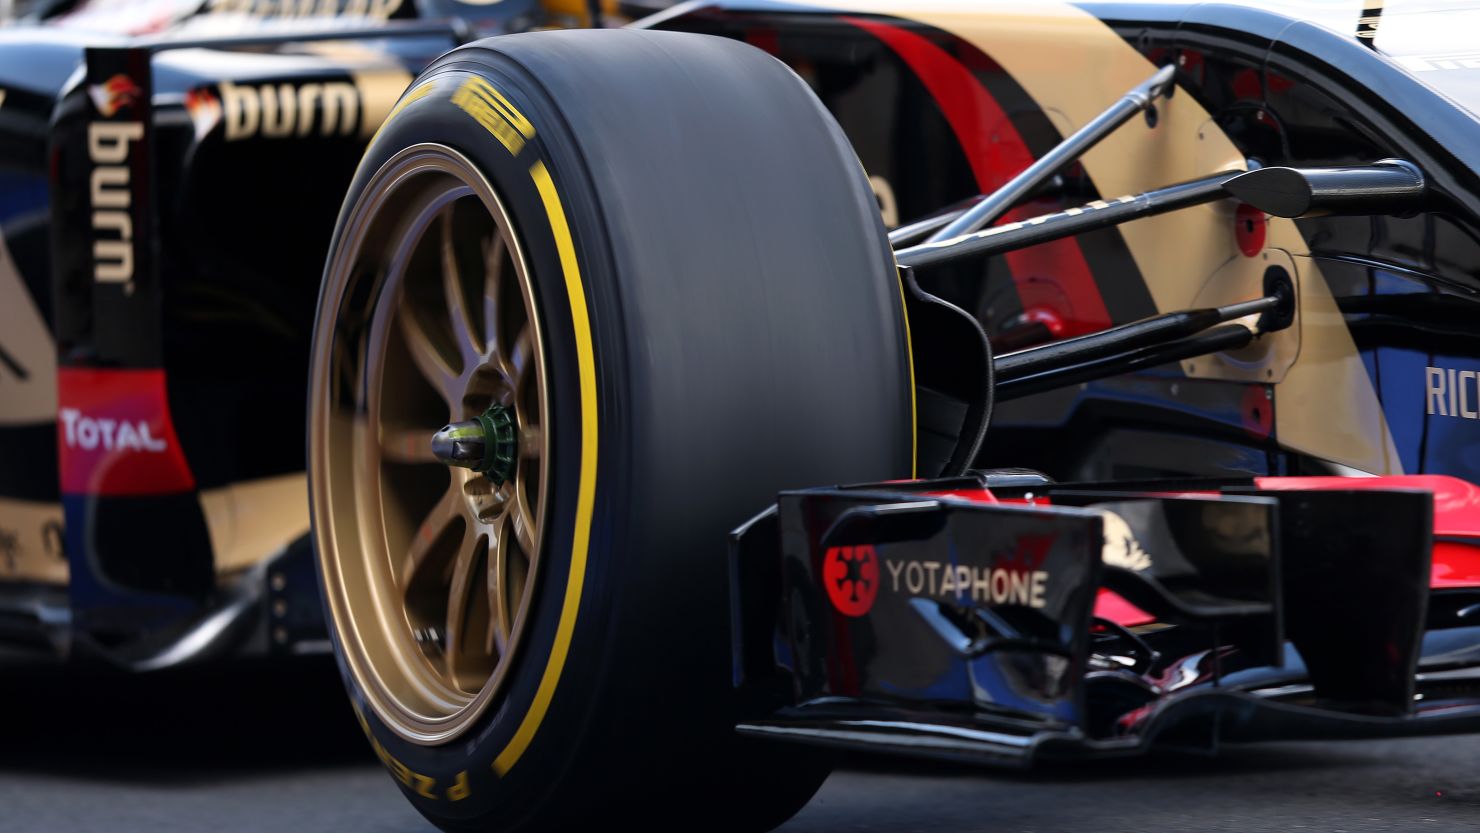 Innovation is a staple of F1 but Pirelli's new 18-inch tires aim to bring the sport back to basics.